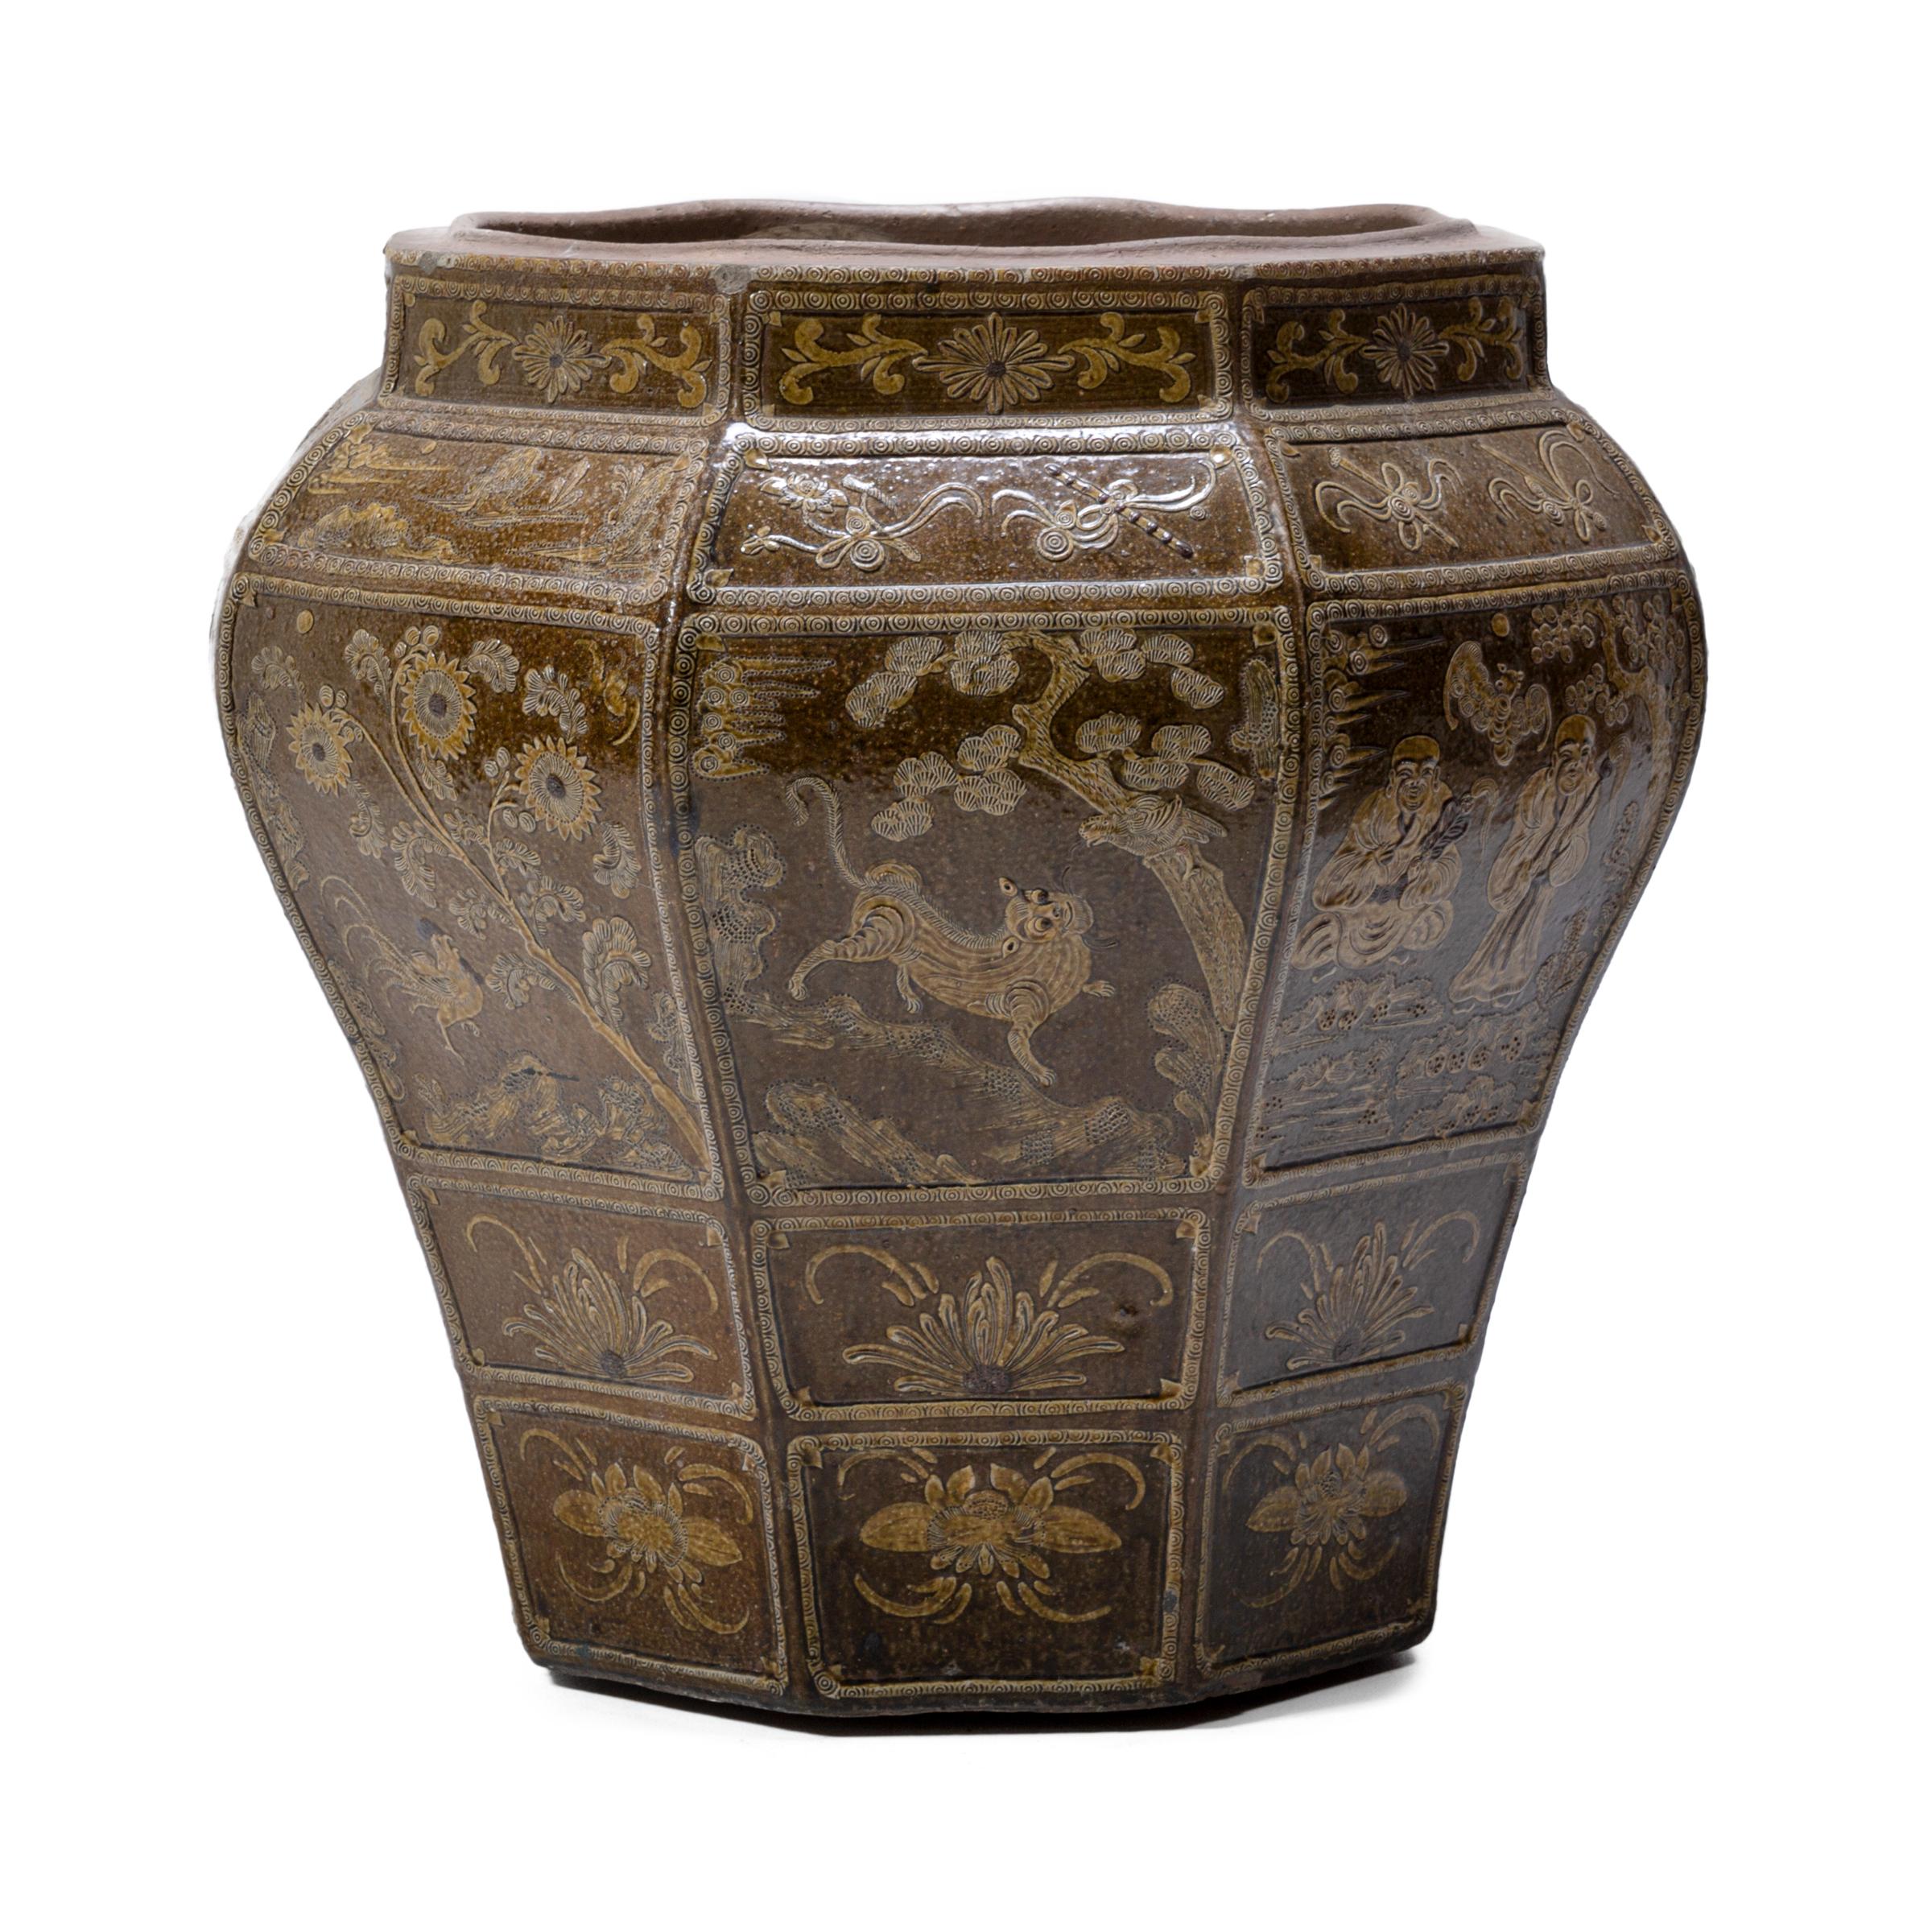 Qing Grand Chinese Glazed Relief Urn, c. 1800